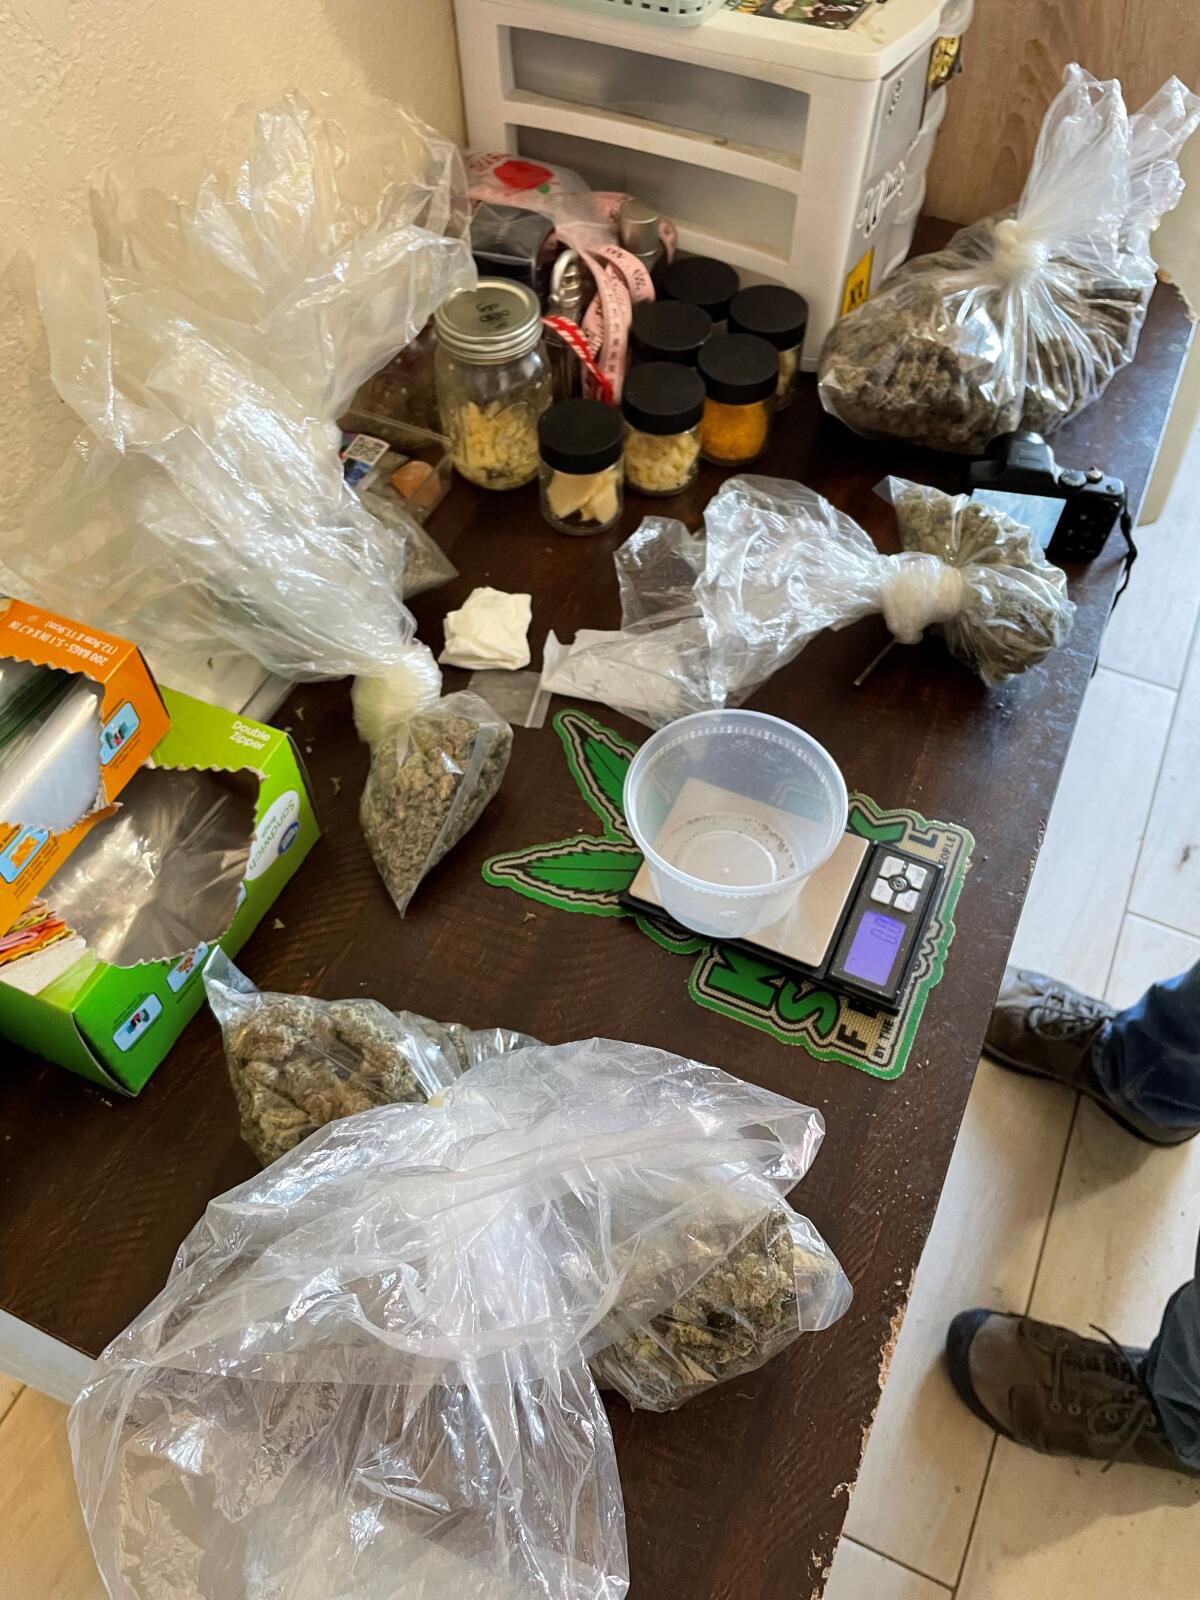 Cannabis, money and a gun and ammunition were seized from a City Heights home Tuesday.